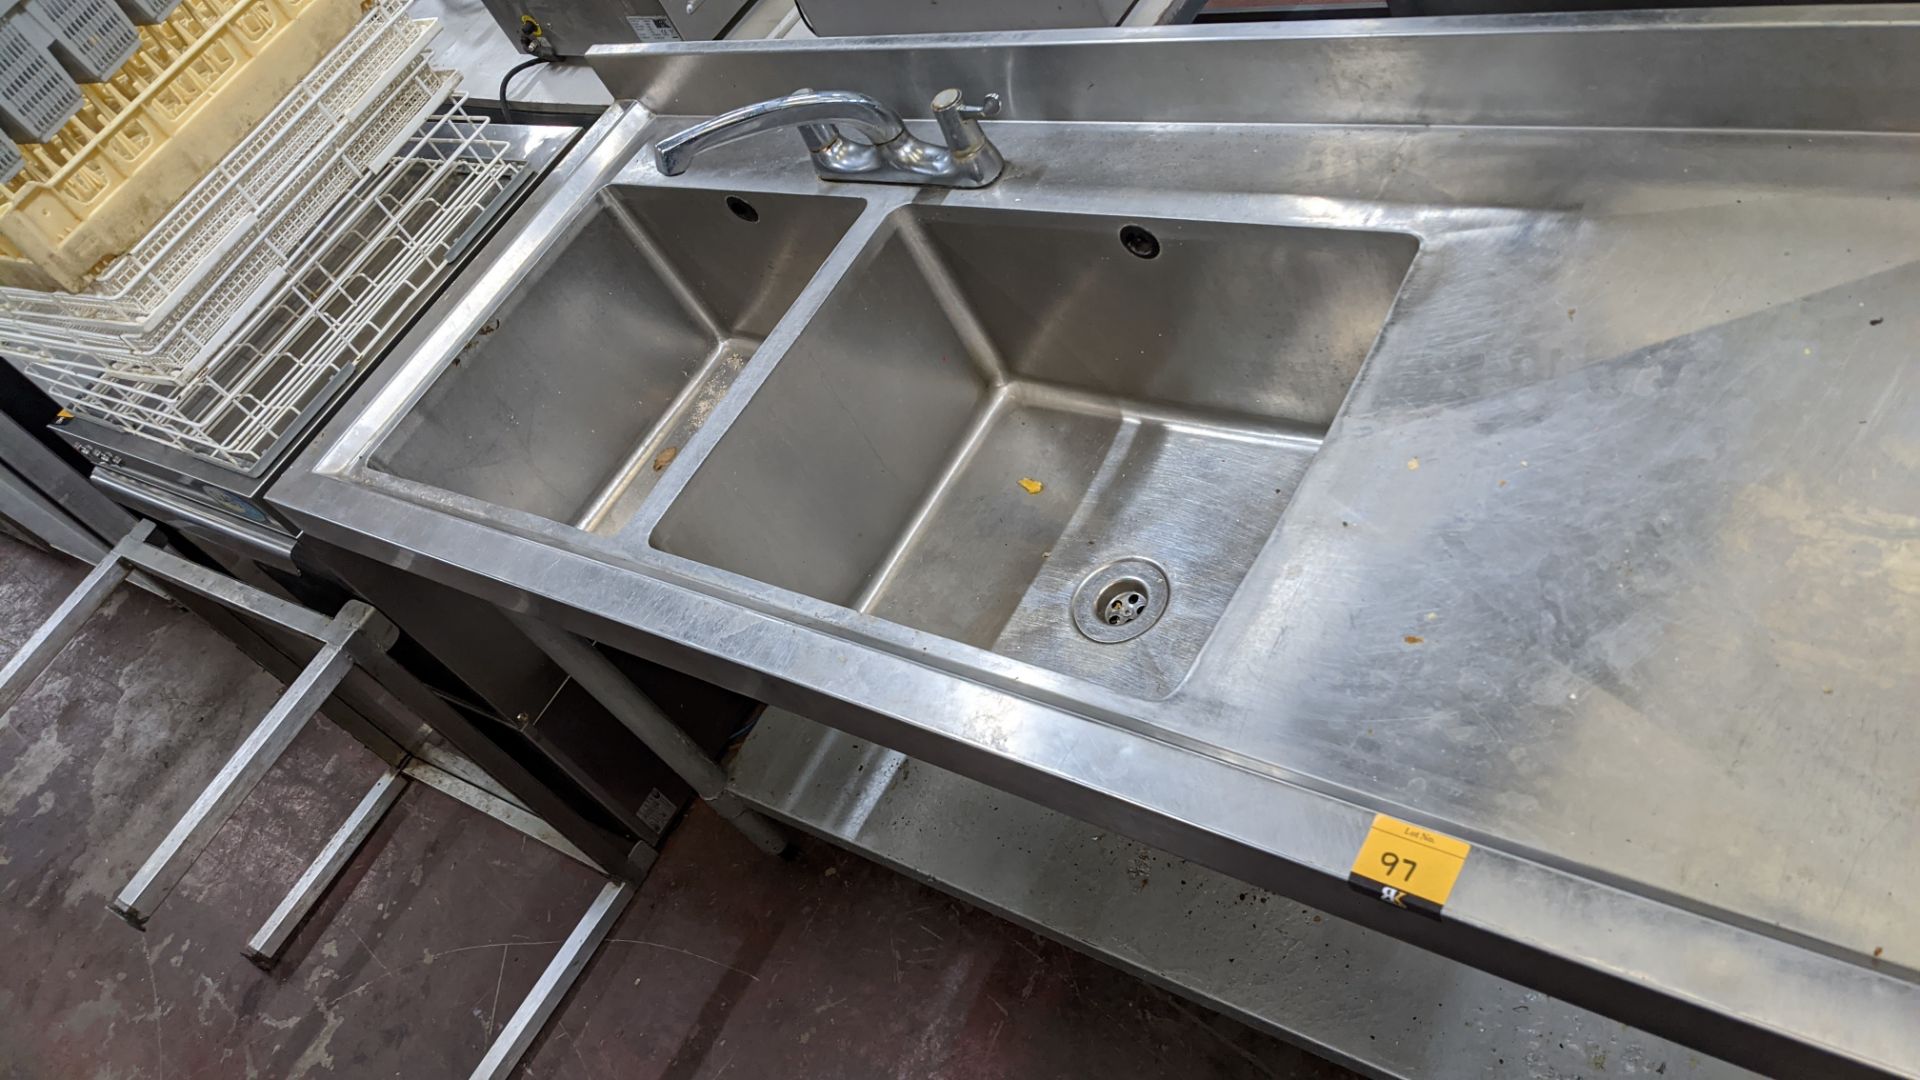 Floor standing stainless steel twin bowl sink incorporating drainer to the right & mixer taps - Image 3 of 5